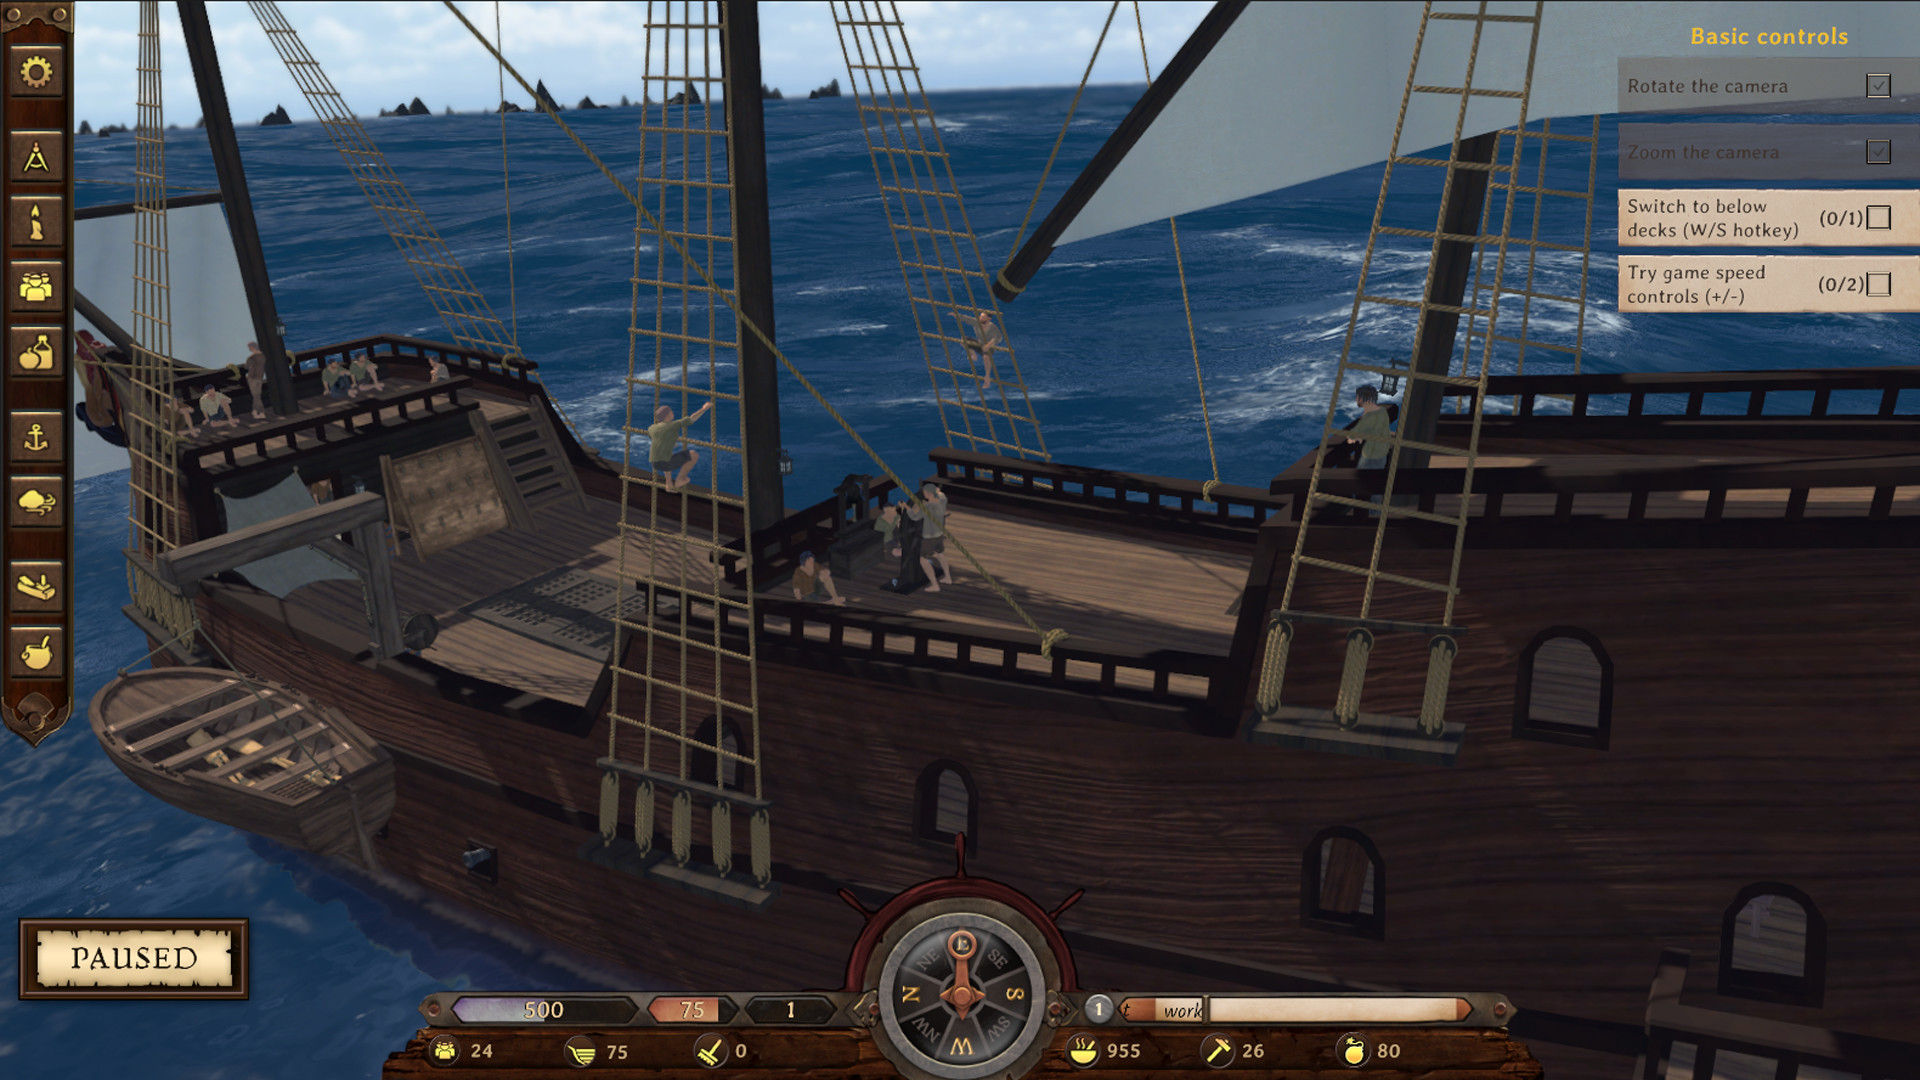 Maritime Calling Brings Players To A Roguelike Seafaring RPG Later This Year